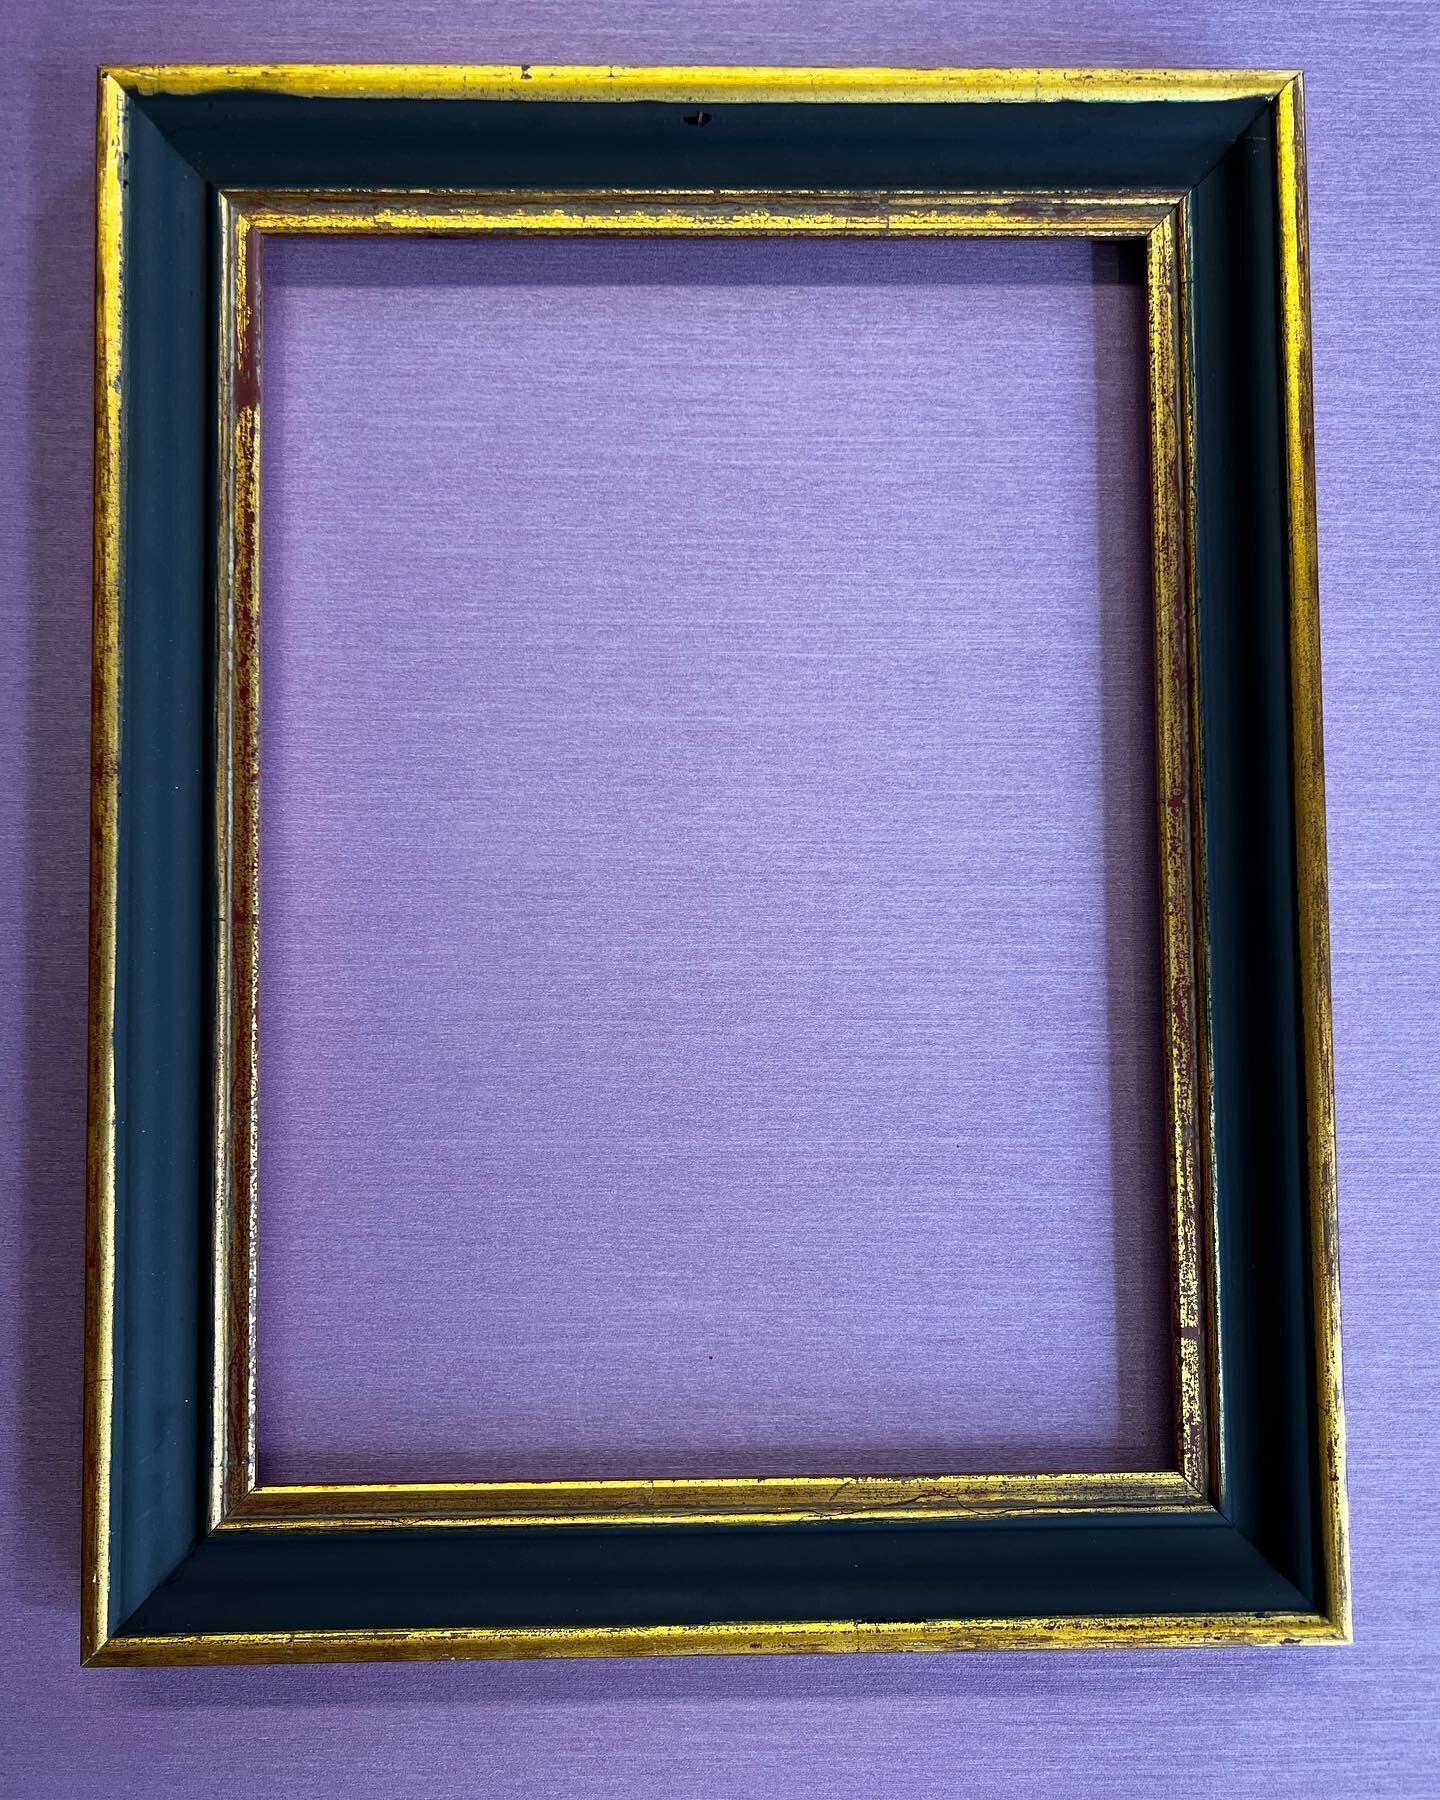 We&rsquo;ve got a few beautifully hand painted frames from the artist Leonardo Dass up for purchase. DM for inquiries or check out our website! Frame size - 11x15
.
.
#customartist #frames #artframing #customartframing #artframing #uniqueframes #artc